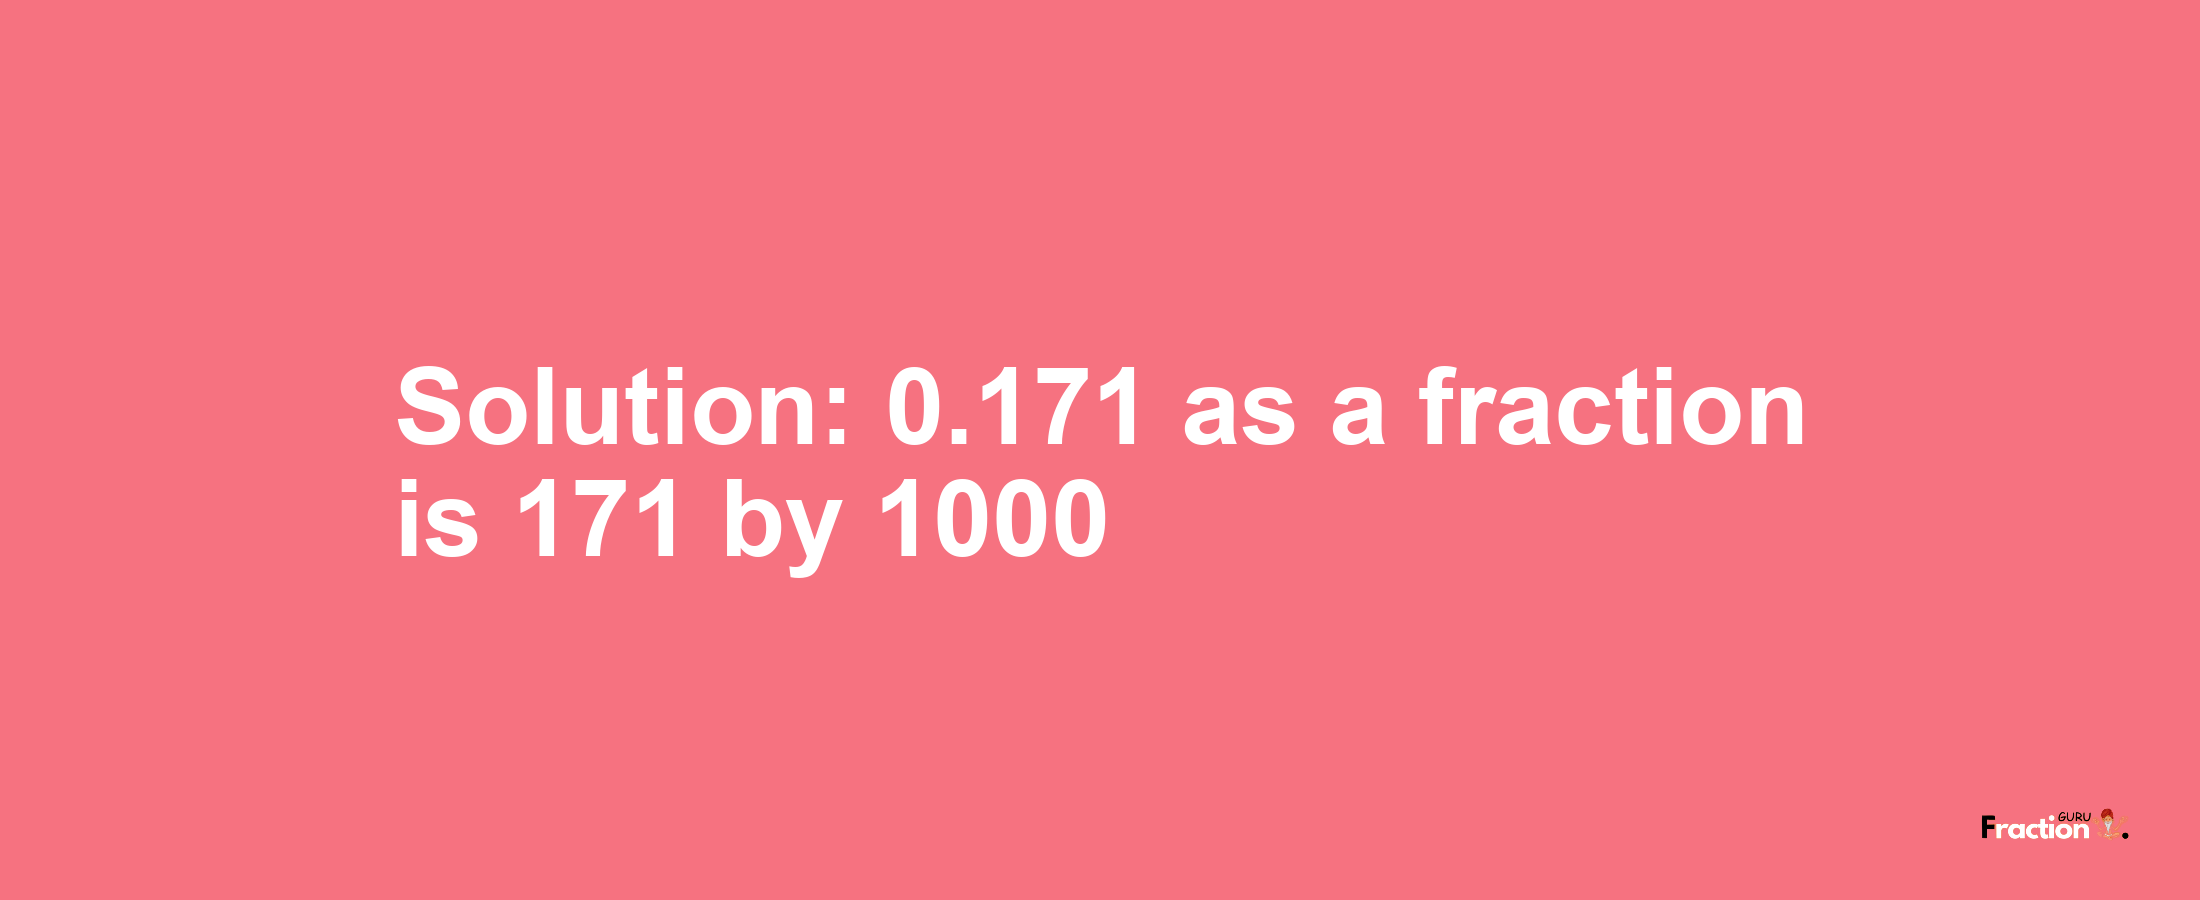 Solution:0.171 as a fraction is 171/1000